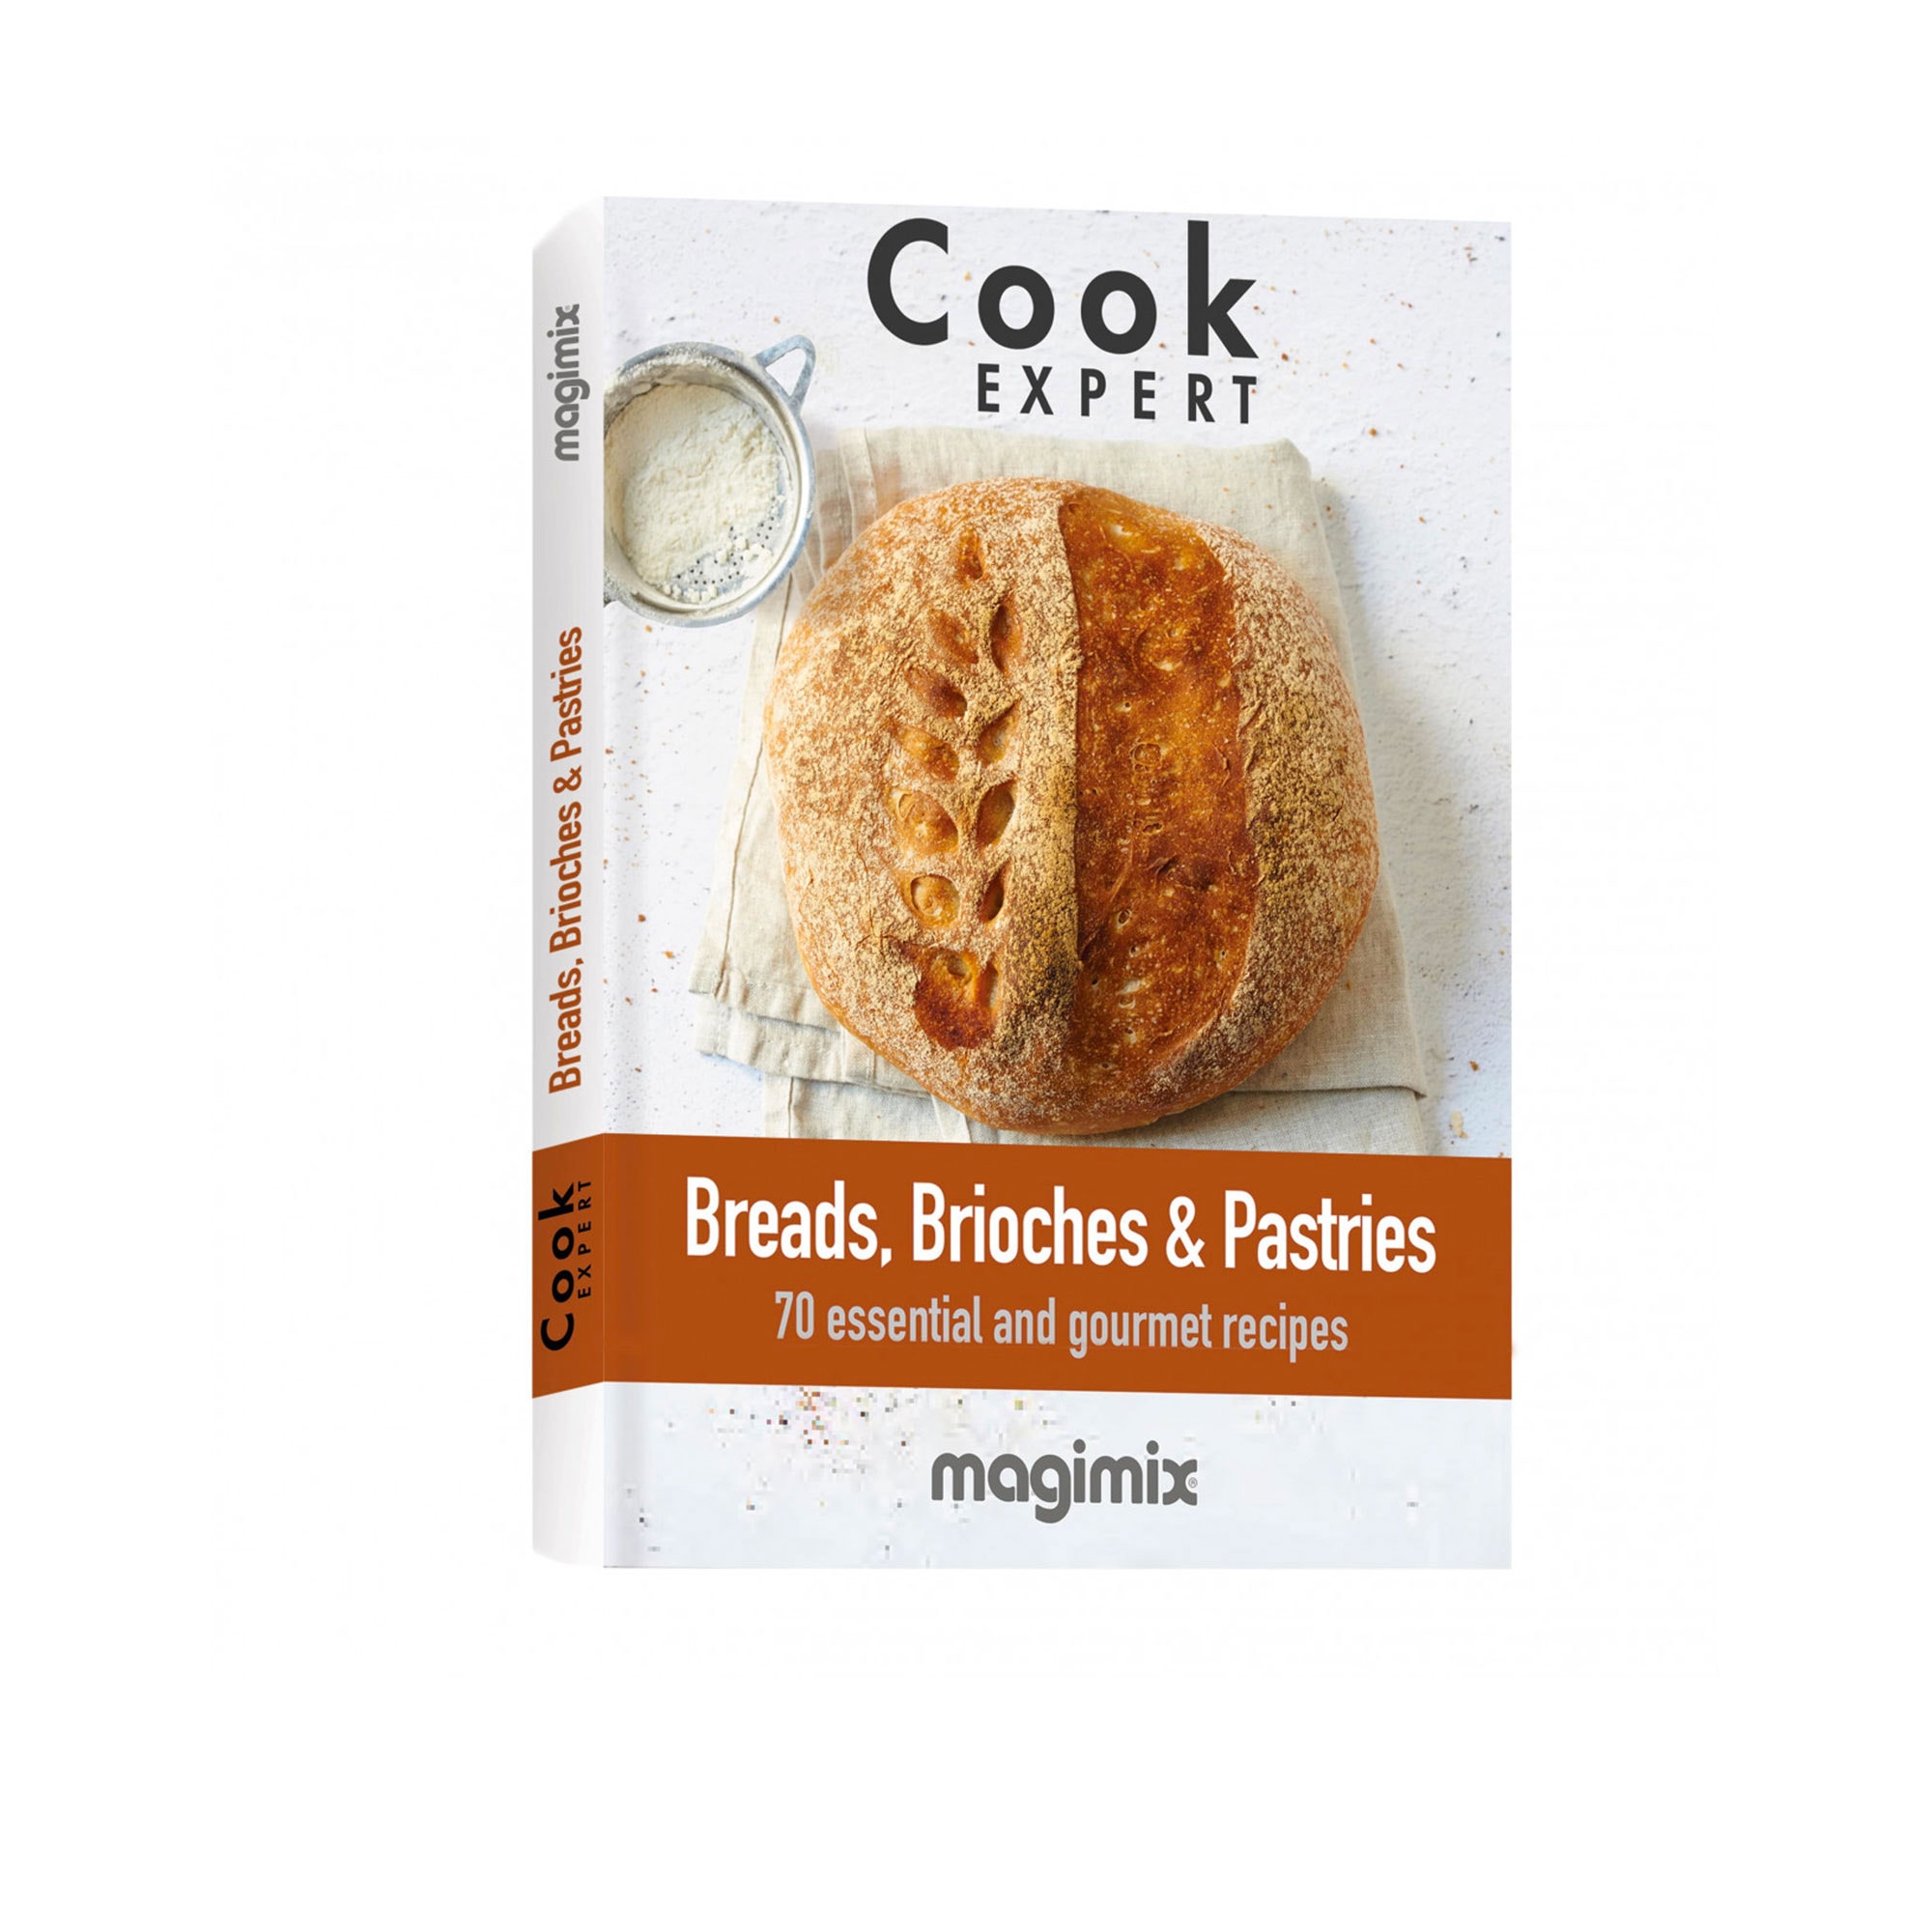 Magimix Breads, Brioches & Pastries Recipes for Cook Expert Image 1